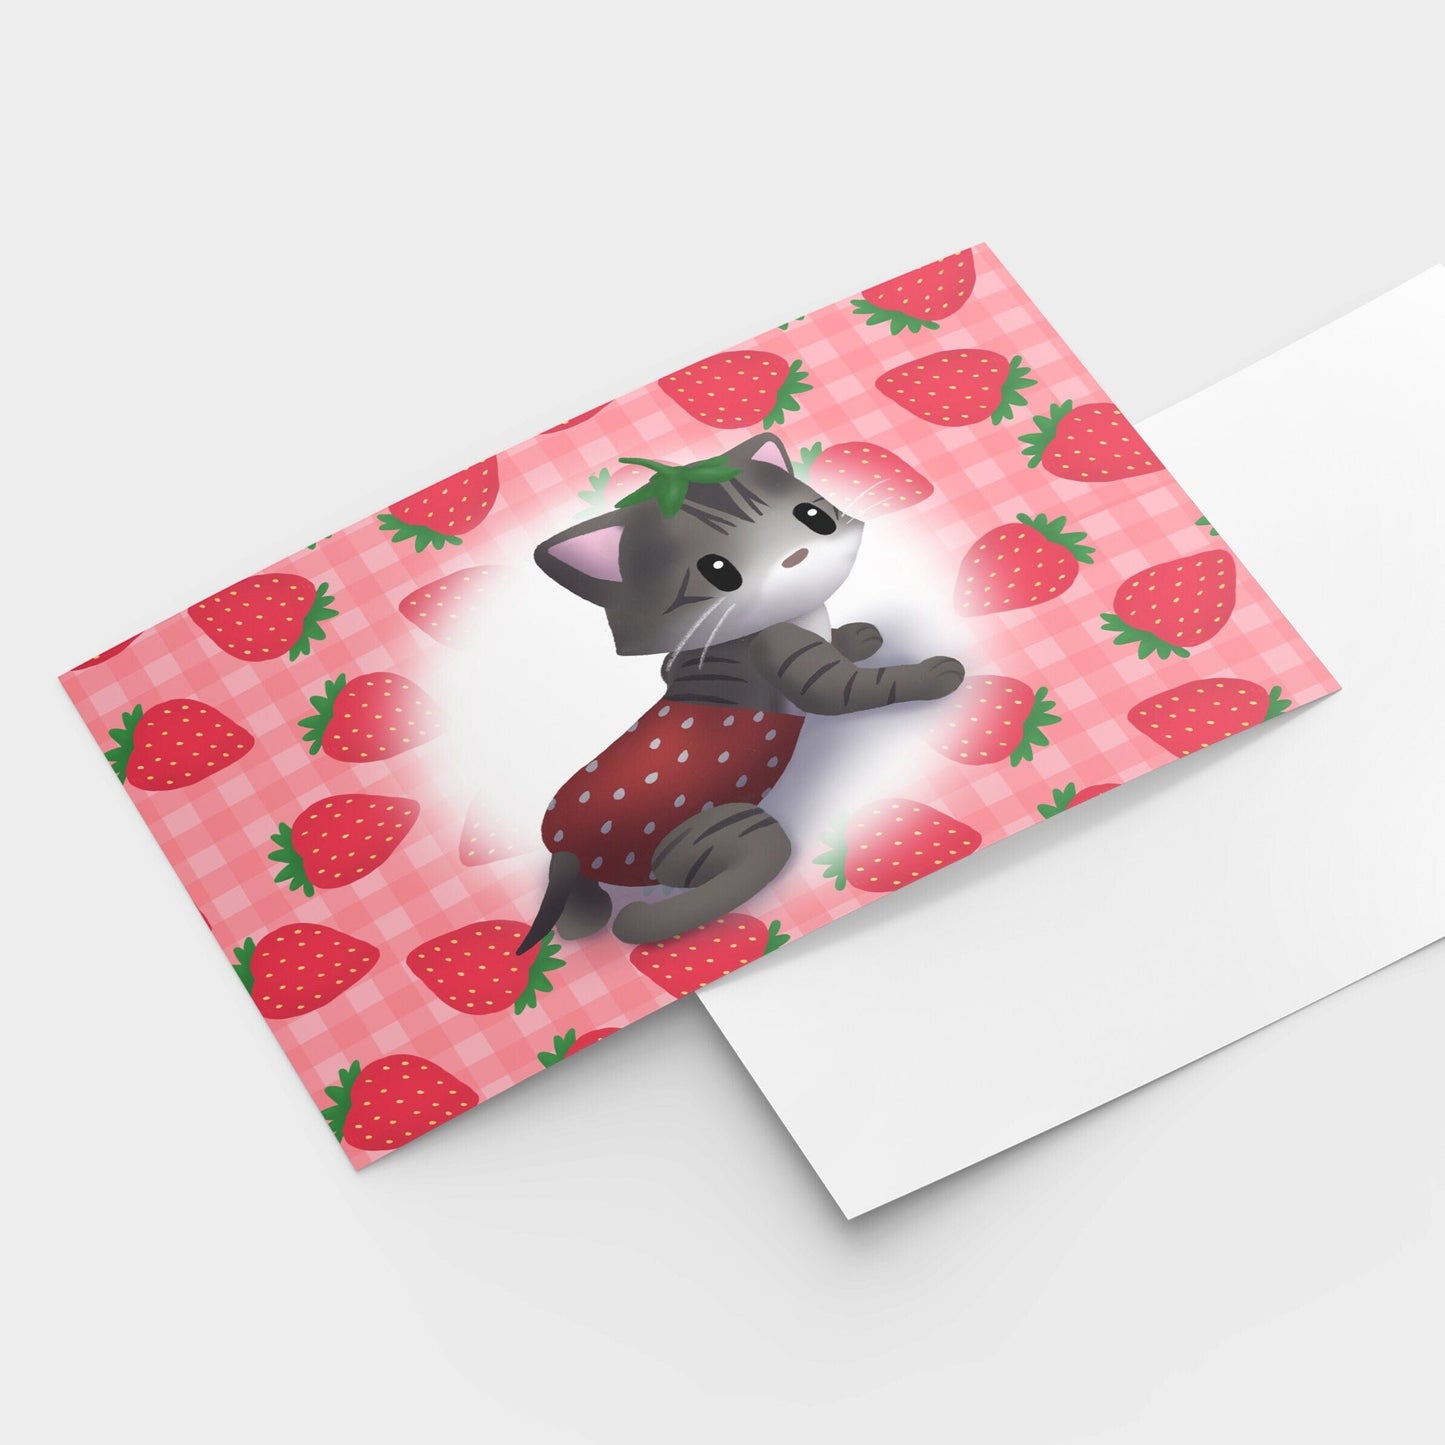 Strawberry Kitty (Teagan) A6 Postcard, Greeting Cards/Postcards, Post Cards